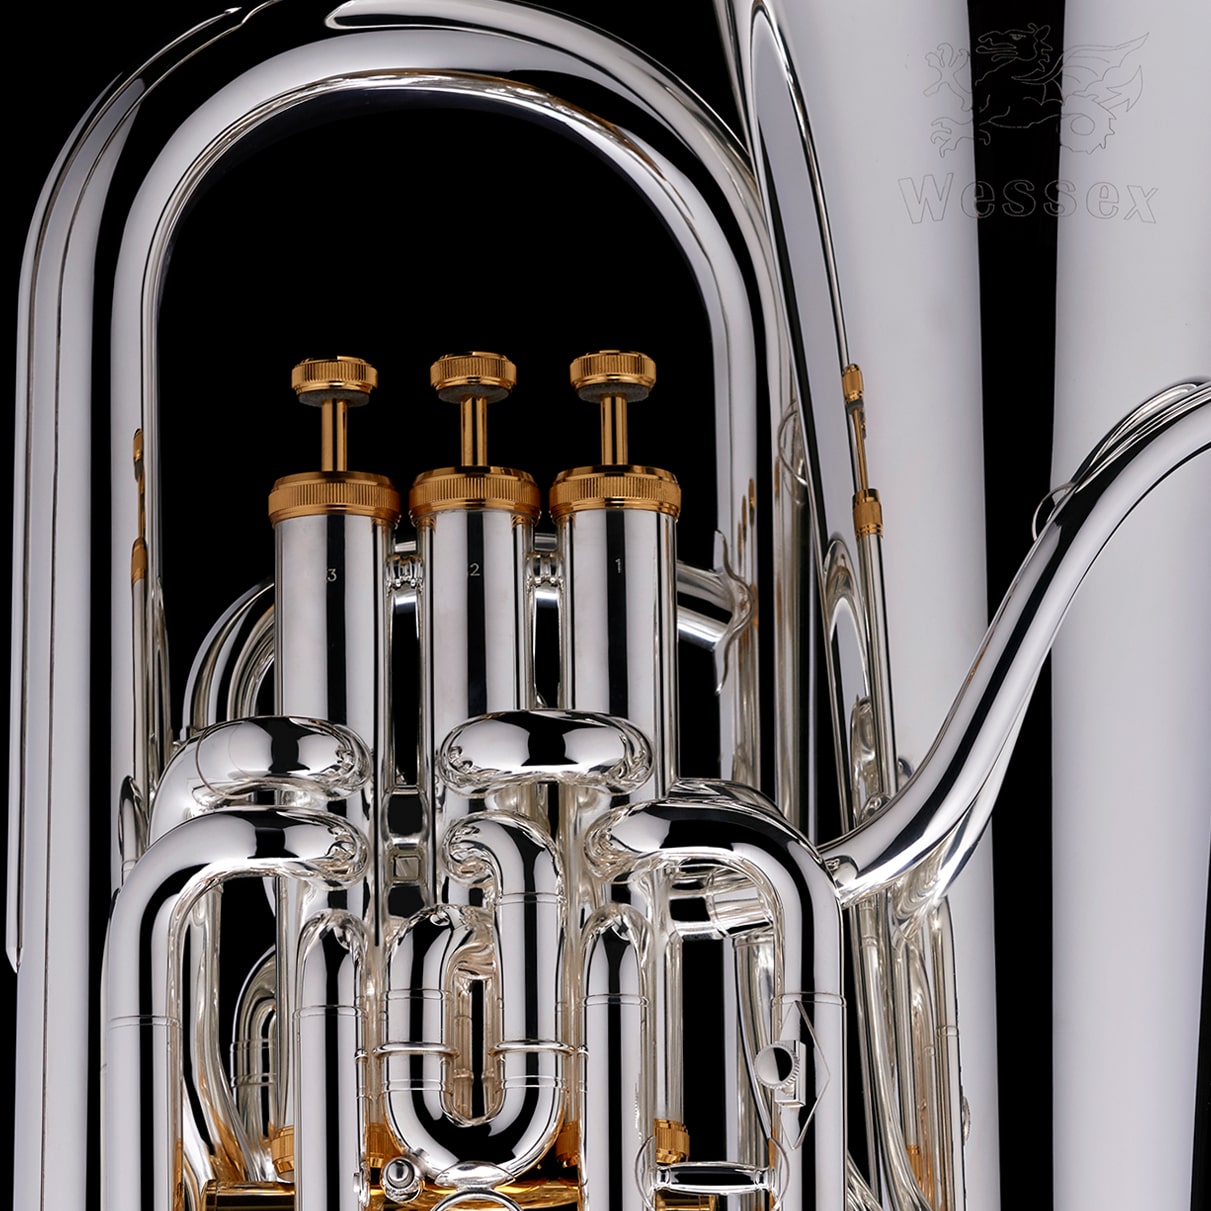 Set of Gold Valve Caps & Buttons for EP100-S Dolce Euphonium